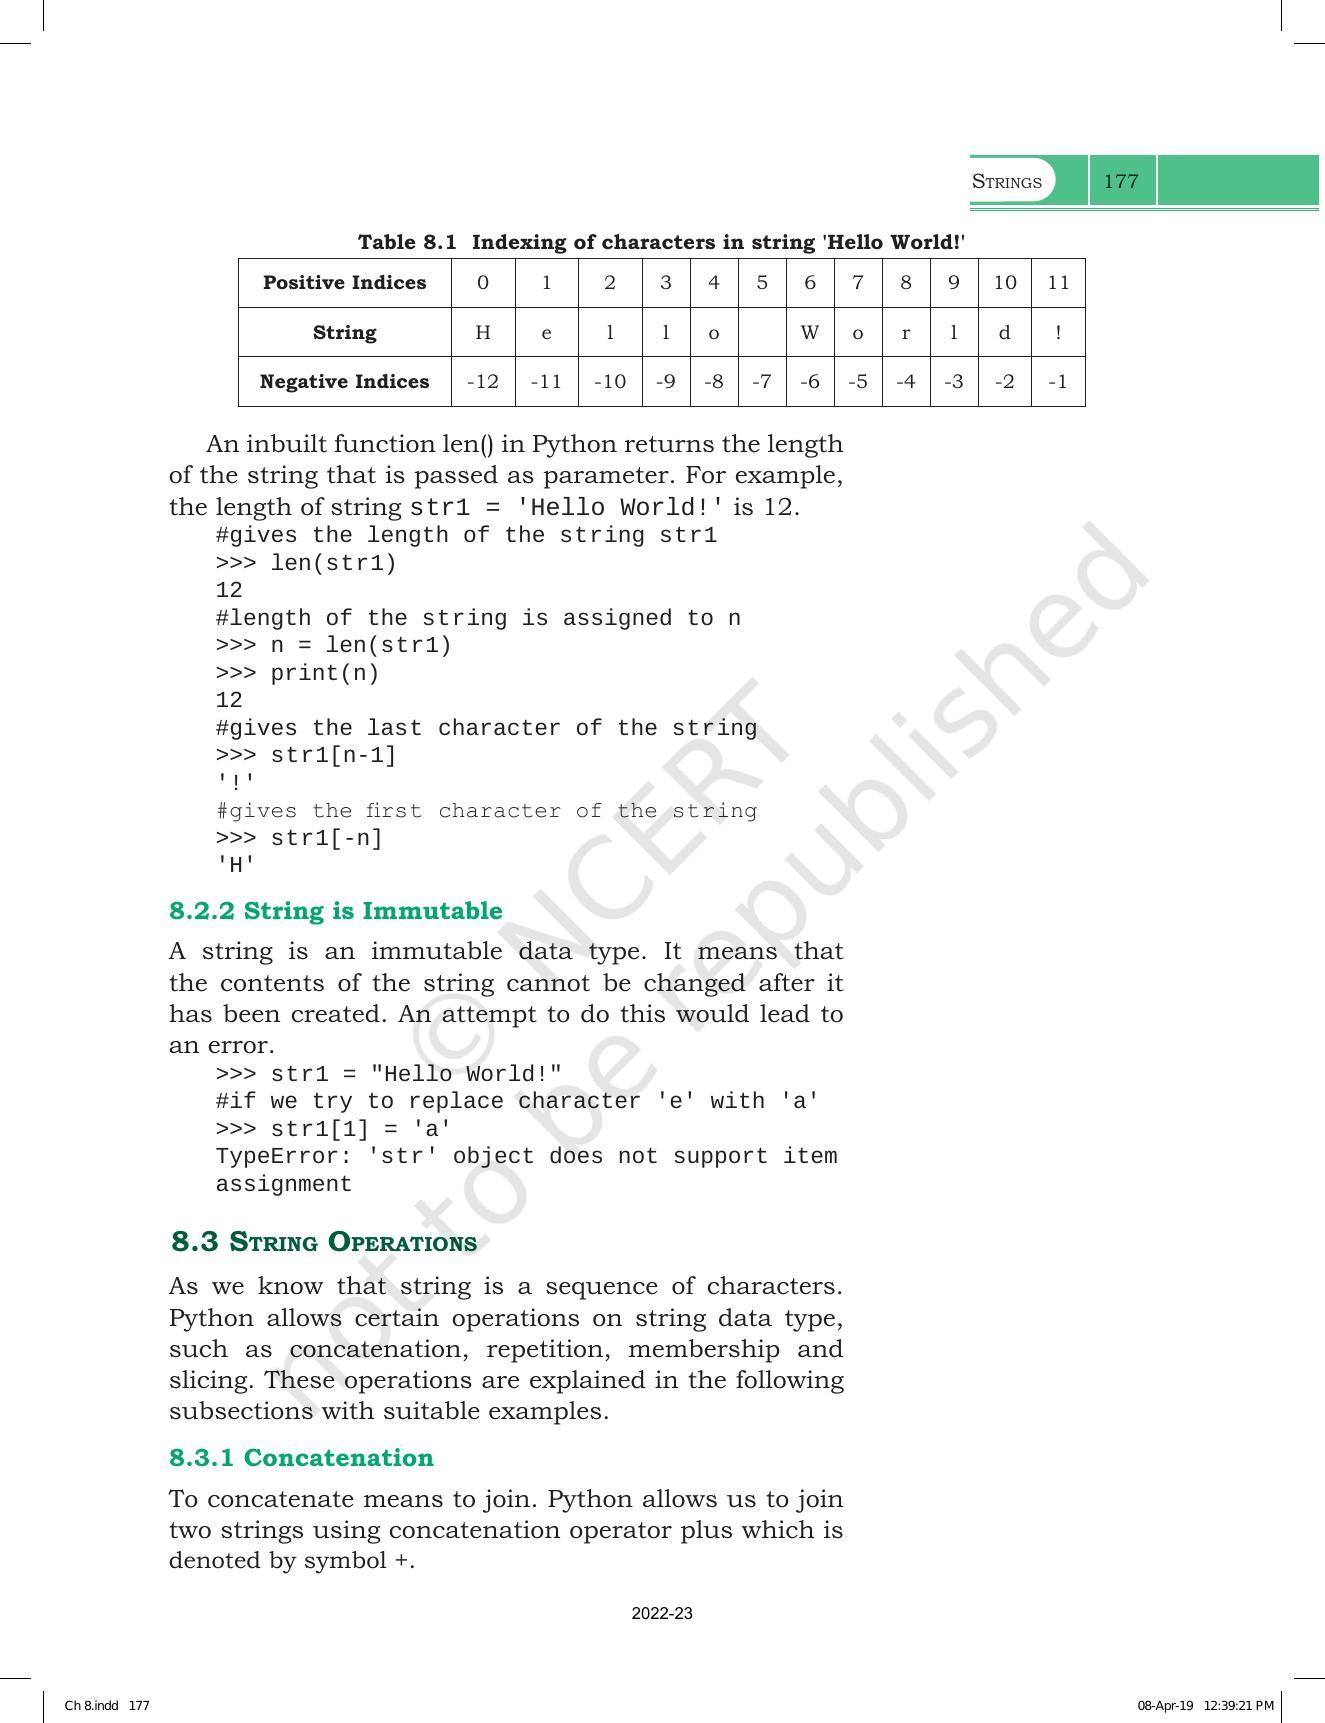 NCERT Book for Class 11 Computer Science Chapter 8 Strings - Page 3